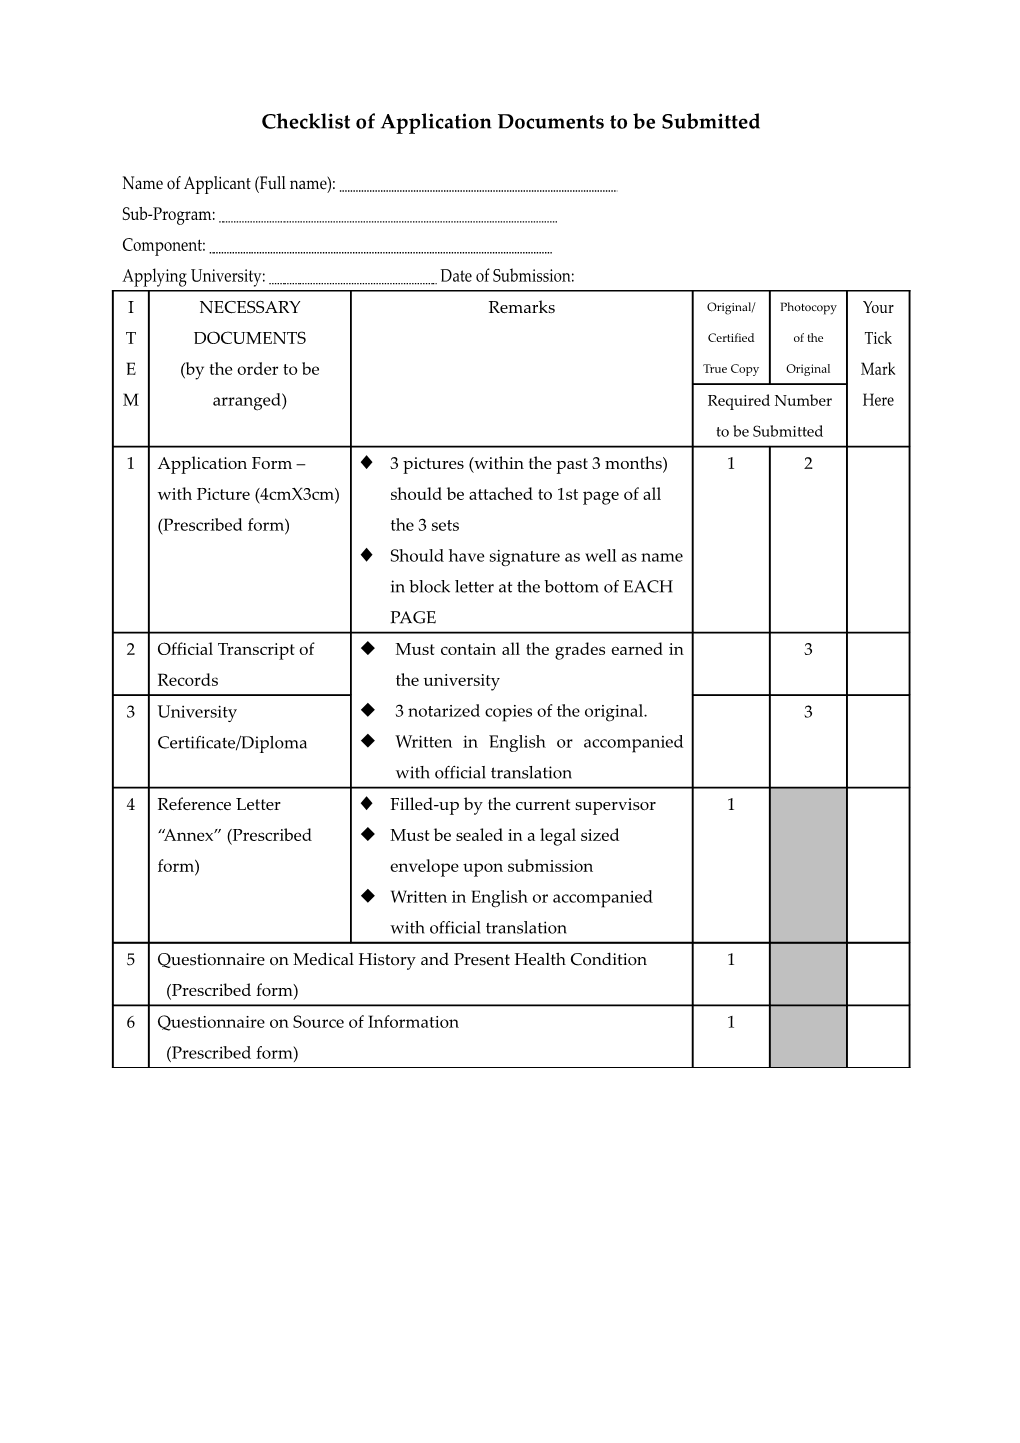 Checklist of Application Documents to Be Submitted